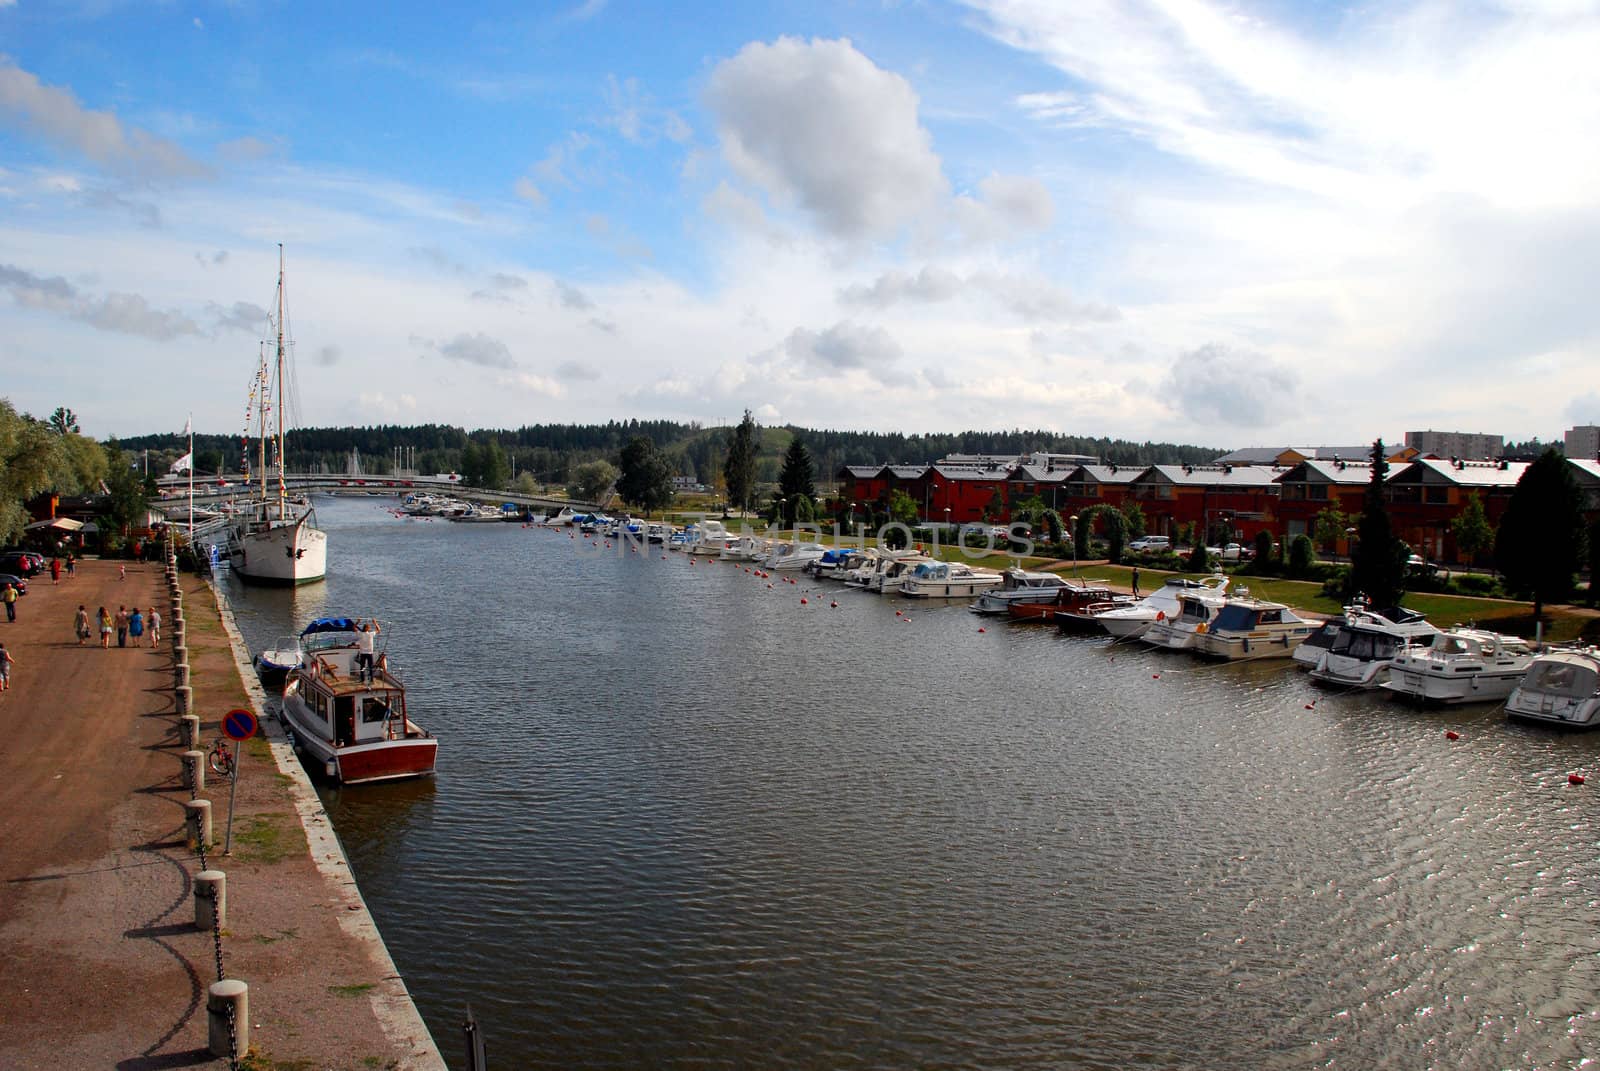 A view of Porvo from a bridge, with the river and many boats. in the background we can see houses and the blue and cloudy sky.